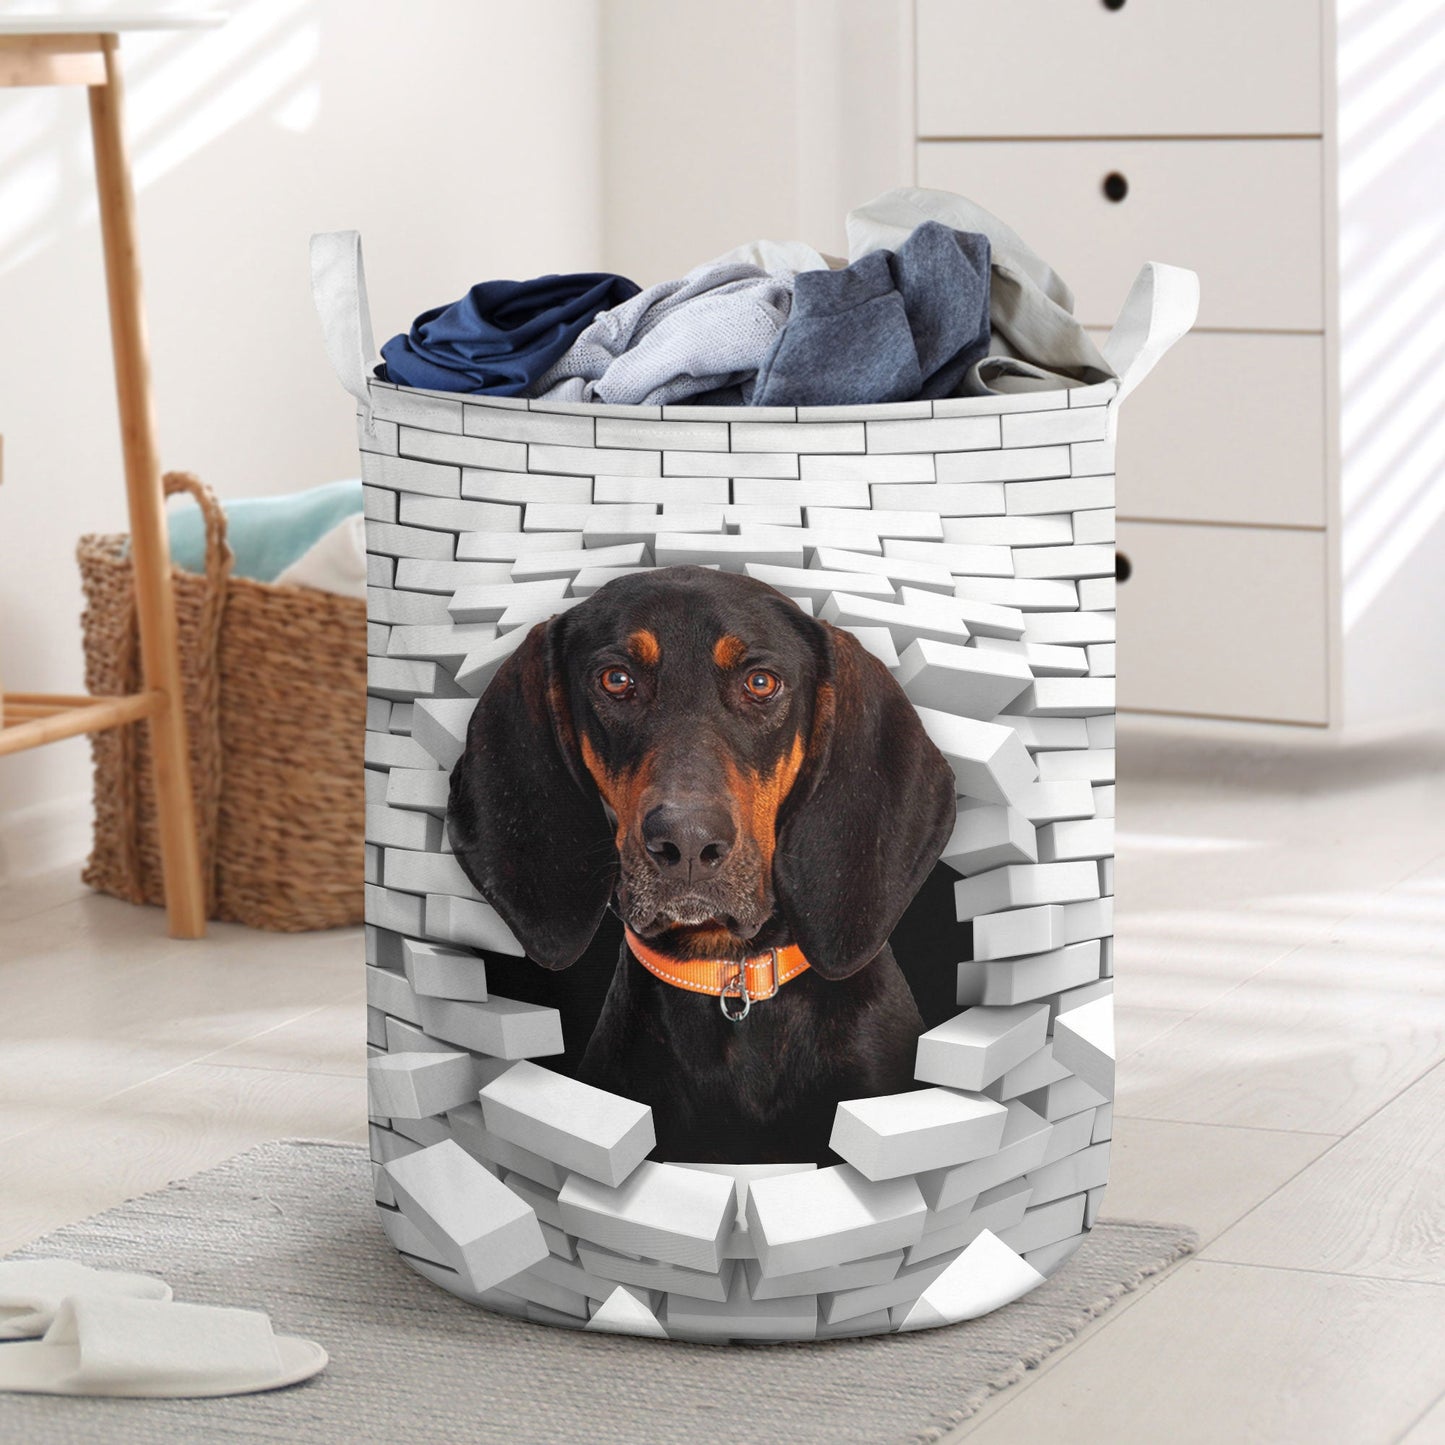 Coonhound - In The Hole Of Wall Pattern Laundry Basket